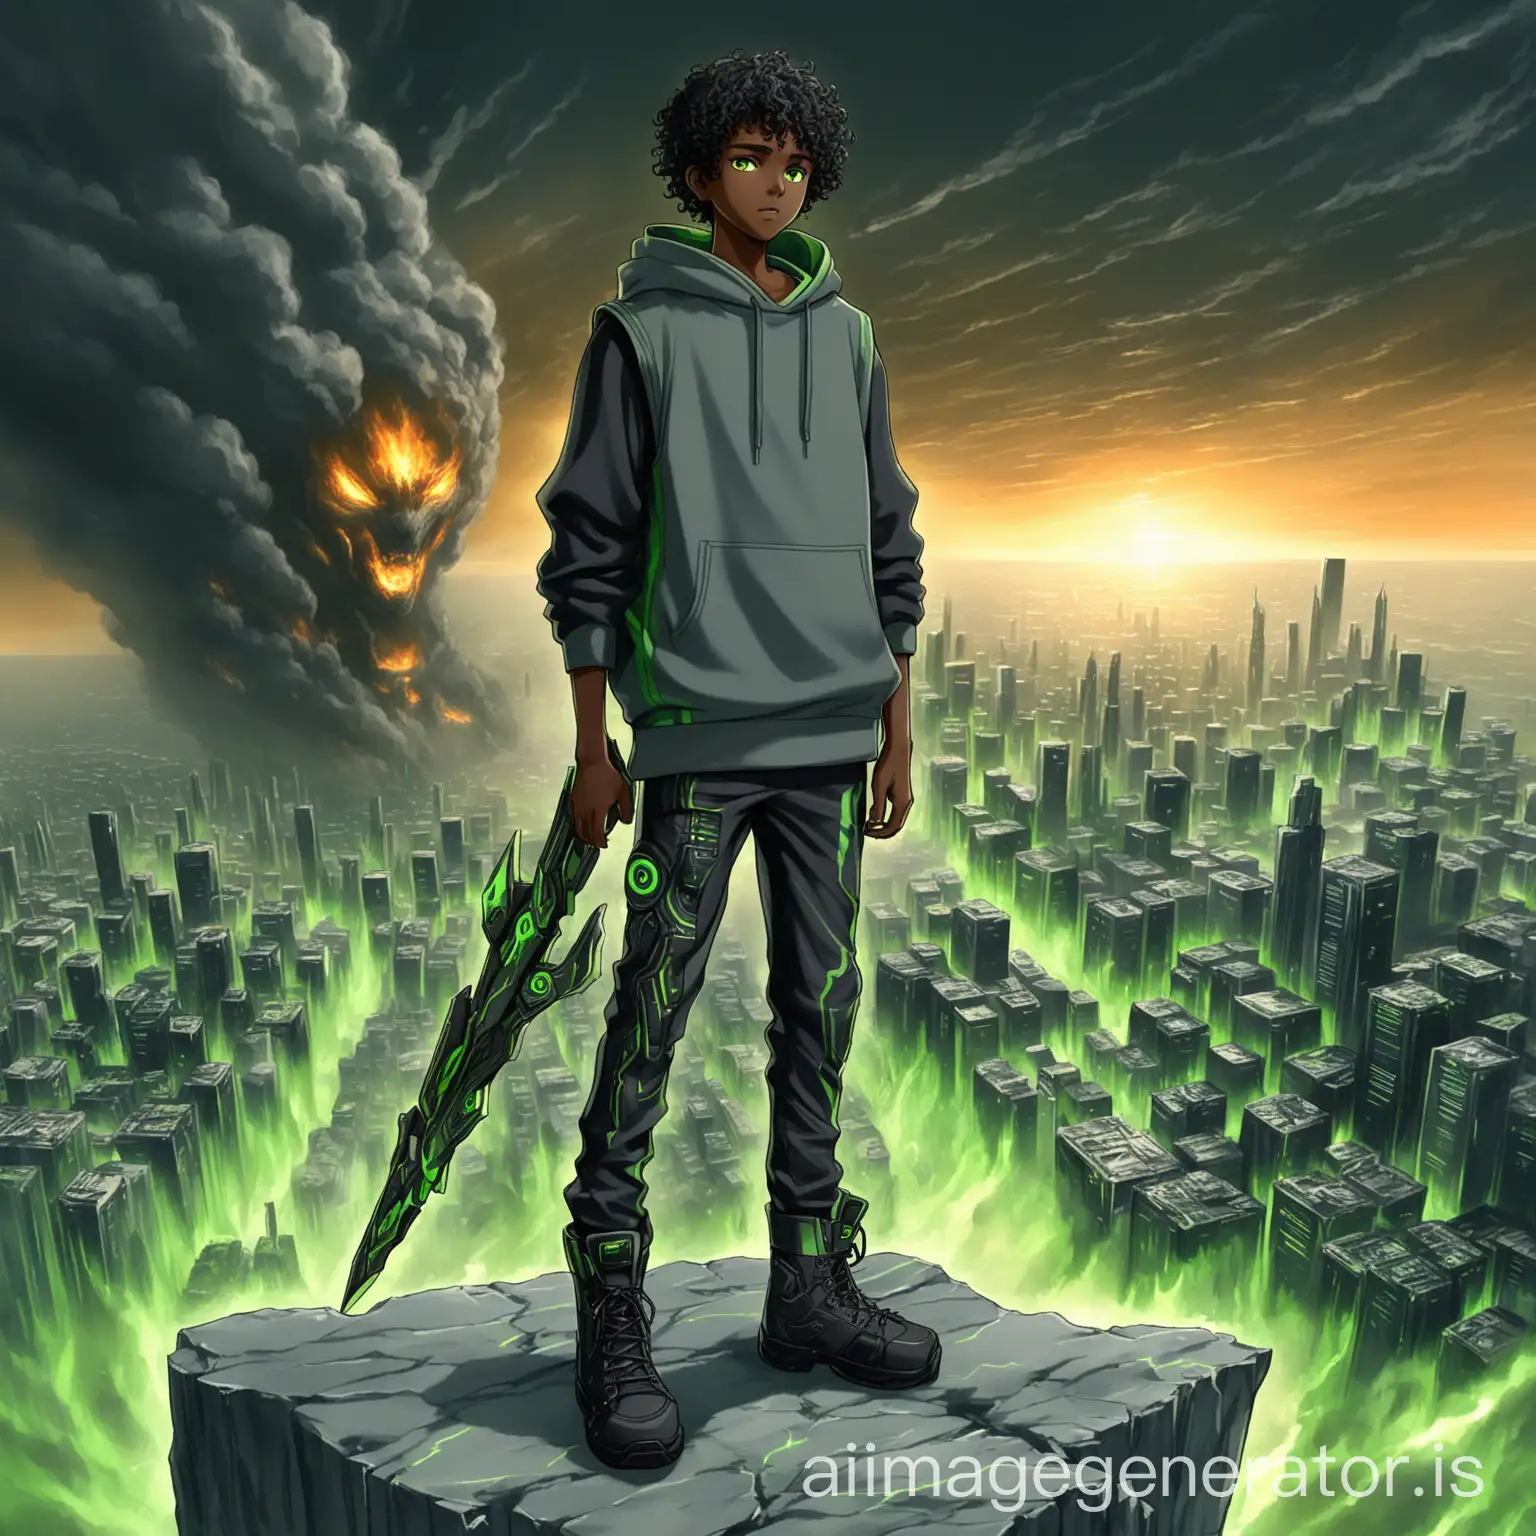 a young african boy 17 years old with black curly hair with dark green highlights at the ends and eyes whose irises are dark green at the top and light green at the bottom. He is standing on a cliff carrying futuristic weapons. He is wearing black trousers and a charcoal grey sweatshirt with a sleeveless hoodie on top of the sweatshirt. He is wearing boots. The sky is grey as a city burns behind him